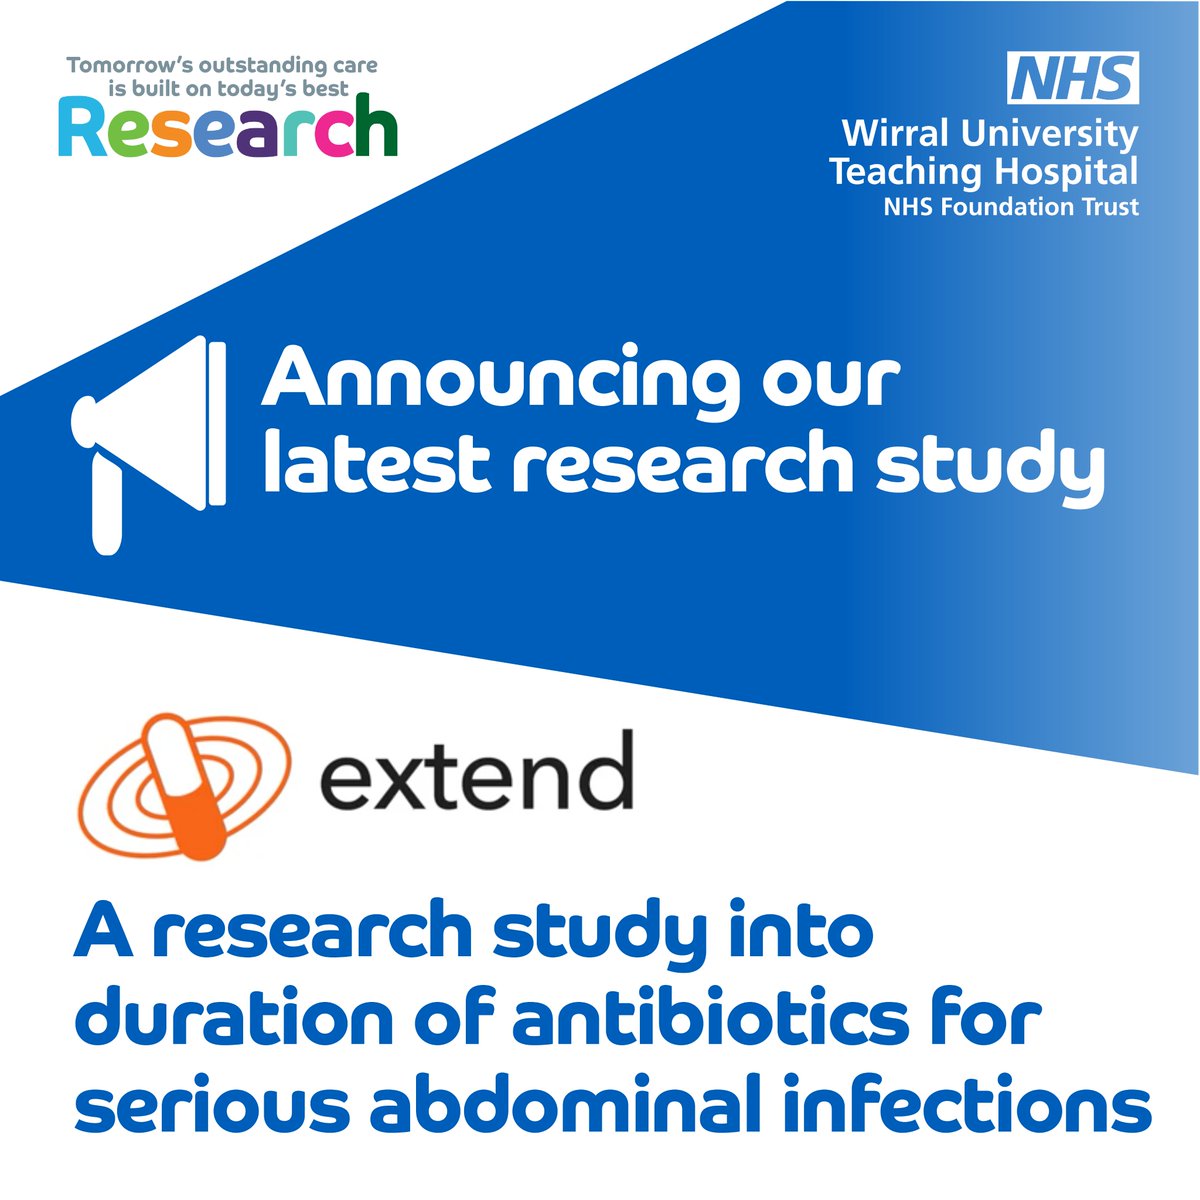 Our Research Team have announced our latest research study called extend. It's investigating how giving longer courses of antibiotics could benefit patients with serious abdominal infections which can occur following an operation or a disease such as cancer. @PatientWuth